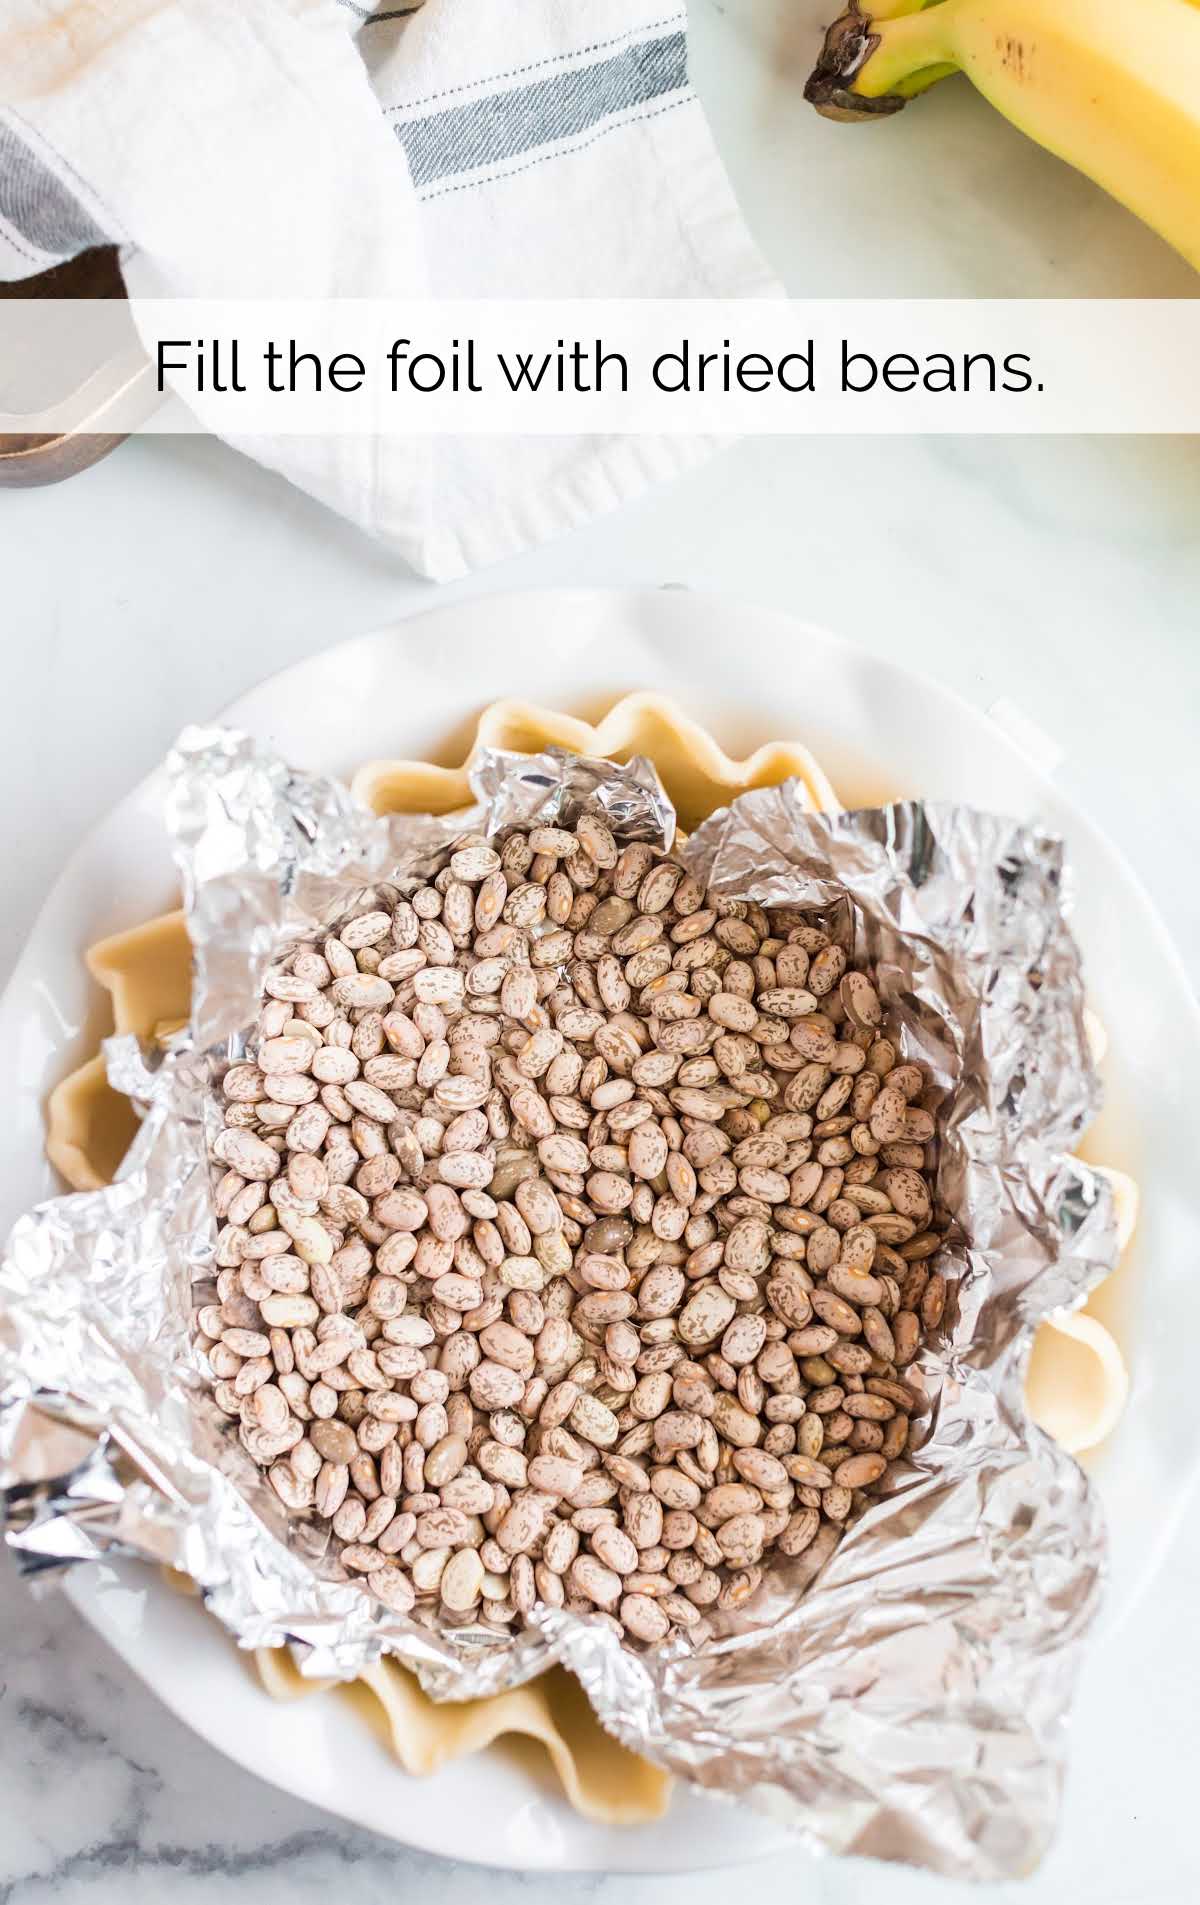 dried beans on foil in a pie crust and baking dish